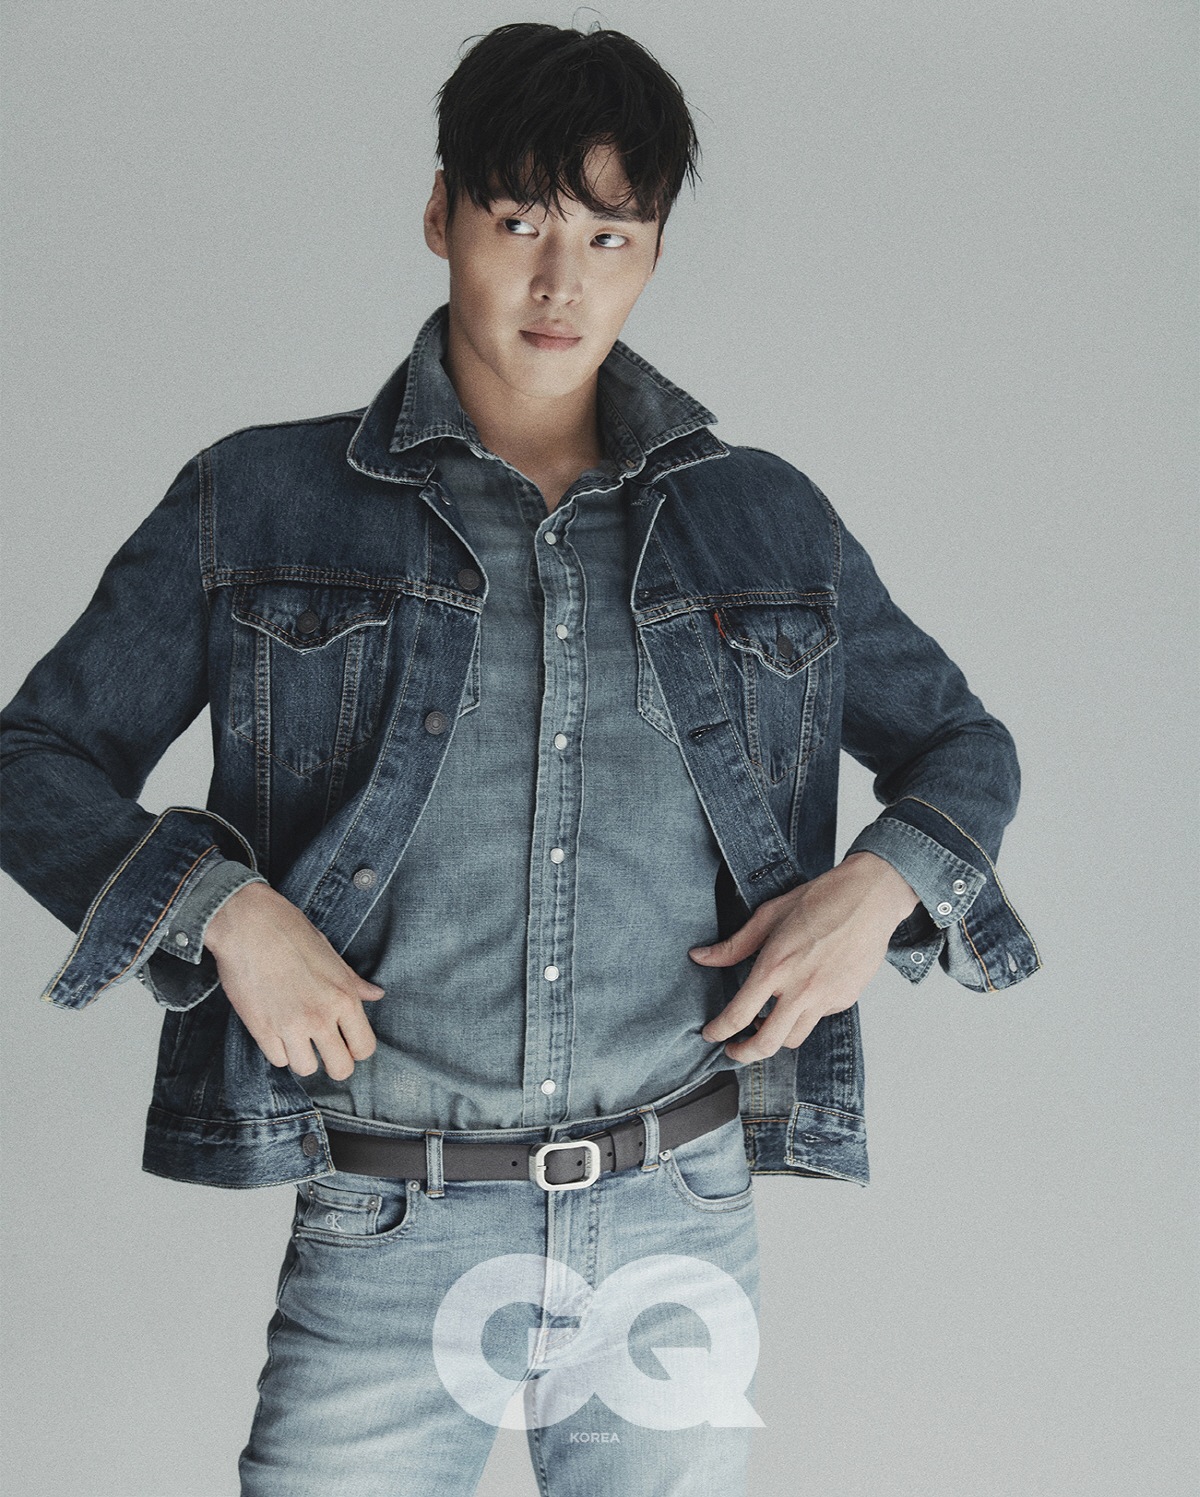 A picture of Lee Tae-hwans understated sexy was released.Actor Lee Tae-hwans picture, which recently showed an extraordinary transformation of acting through JTBCs Elegant Friends, was released through the mens magazine GQ KOREA.Lee Tae-hwan in the public picture captures the eye with superior physical and warm appearance.Leather, denim, white T-shirts, and other styles with their own feelings, perfecting the sexy charm captivated the woman.In an interview with the picture, Lee Tae-hwan said, It was a villain that I would not have a stronger role in the future. I was nervous while shooting, but later I seemed to have put it down completely and postponed it. I recalled.As for the job of Actor, Happiness and pain seem to coexist together.It is really happy to meet with many people and to feel indirectly the feelings that I will not experience for the rest of my life.  When someone sympathizes with the Characters and ambassadors, I am proud when what I wanted to express is delivered to people. In addition, he appeared in SBS entertainment Park Jang Deso and got the nickname love newborn baby. I do not think it is a good style to actively love, but I want to try love straight before the end of my 20s.I conveyed my honest heart.Lee Tae-hwan made a special appearance as a golf instructor in the JTBC gilt drama Elegant Friends. He made a strong impression on viewers by performing a modifier called Perfect Billon.Lee Tae-hwan, who was called end stiller by sweeping the ending at the beginning of the play, left the death of Jugangsan as a mystery axis and played a big role more than a special appearance.Meanwhile, Lee Tae-hwans more detailed interviews and pictures can be found in the September issue of GQ KOREA.